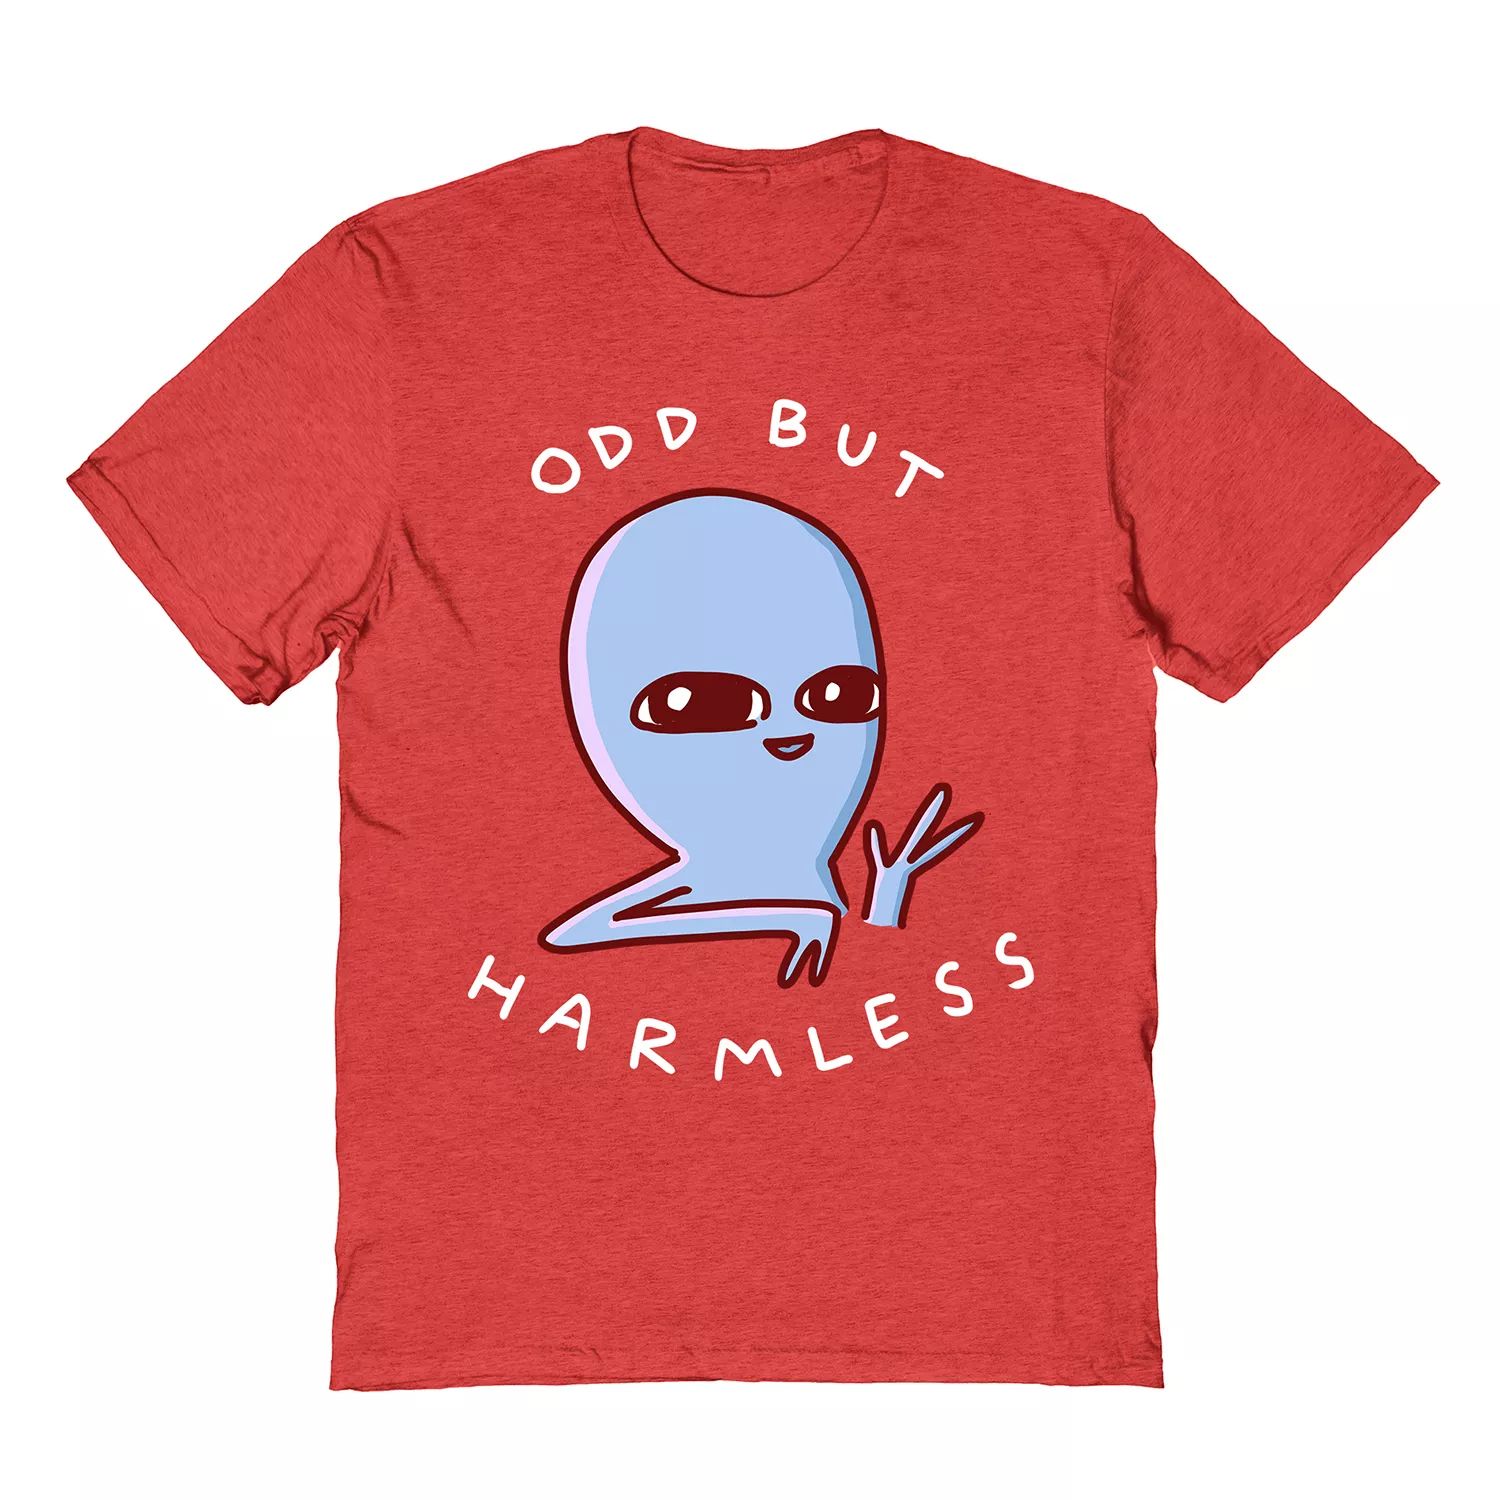 pyle nathan w strange planet the sneaking hiding vibrating creature Мужская футболка Strange Planet от Nathan Pyle Odd But Harmless Tee COLAB89 by Threadless